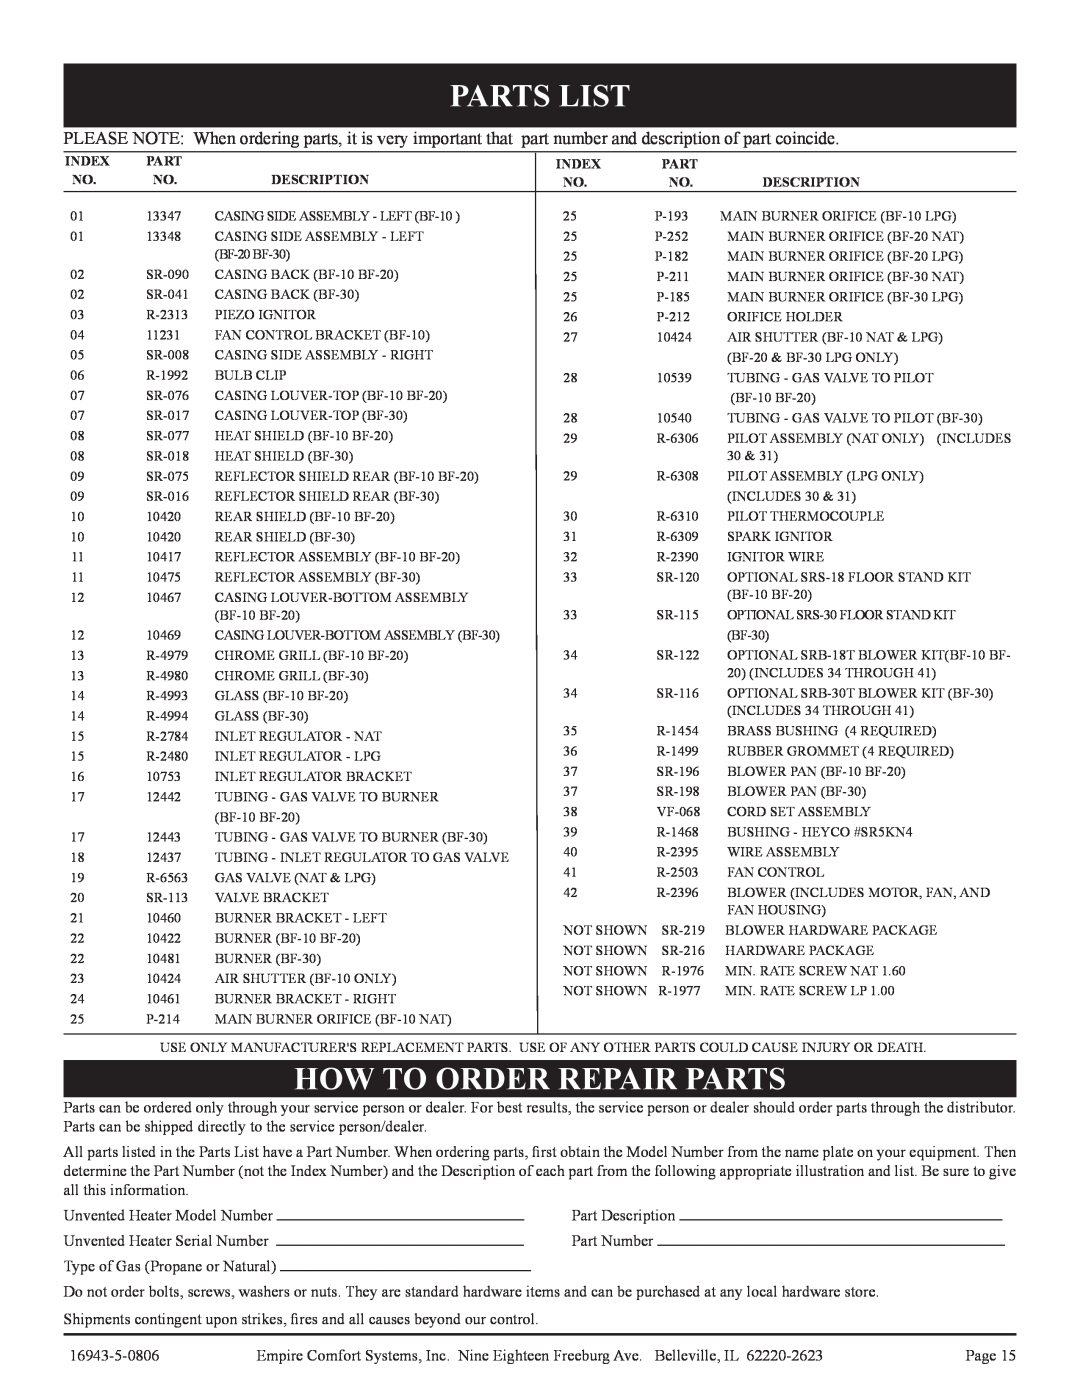 Empire Comfort Systems BF-30-2, BF-20-2, BF-10-2 installation instructions Parts List, How To Order Repair Parts 